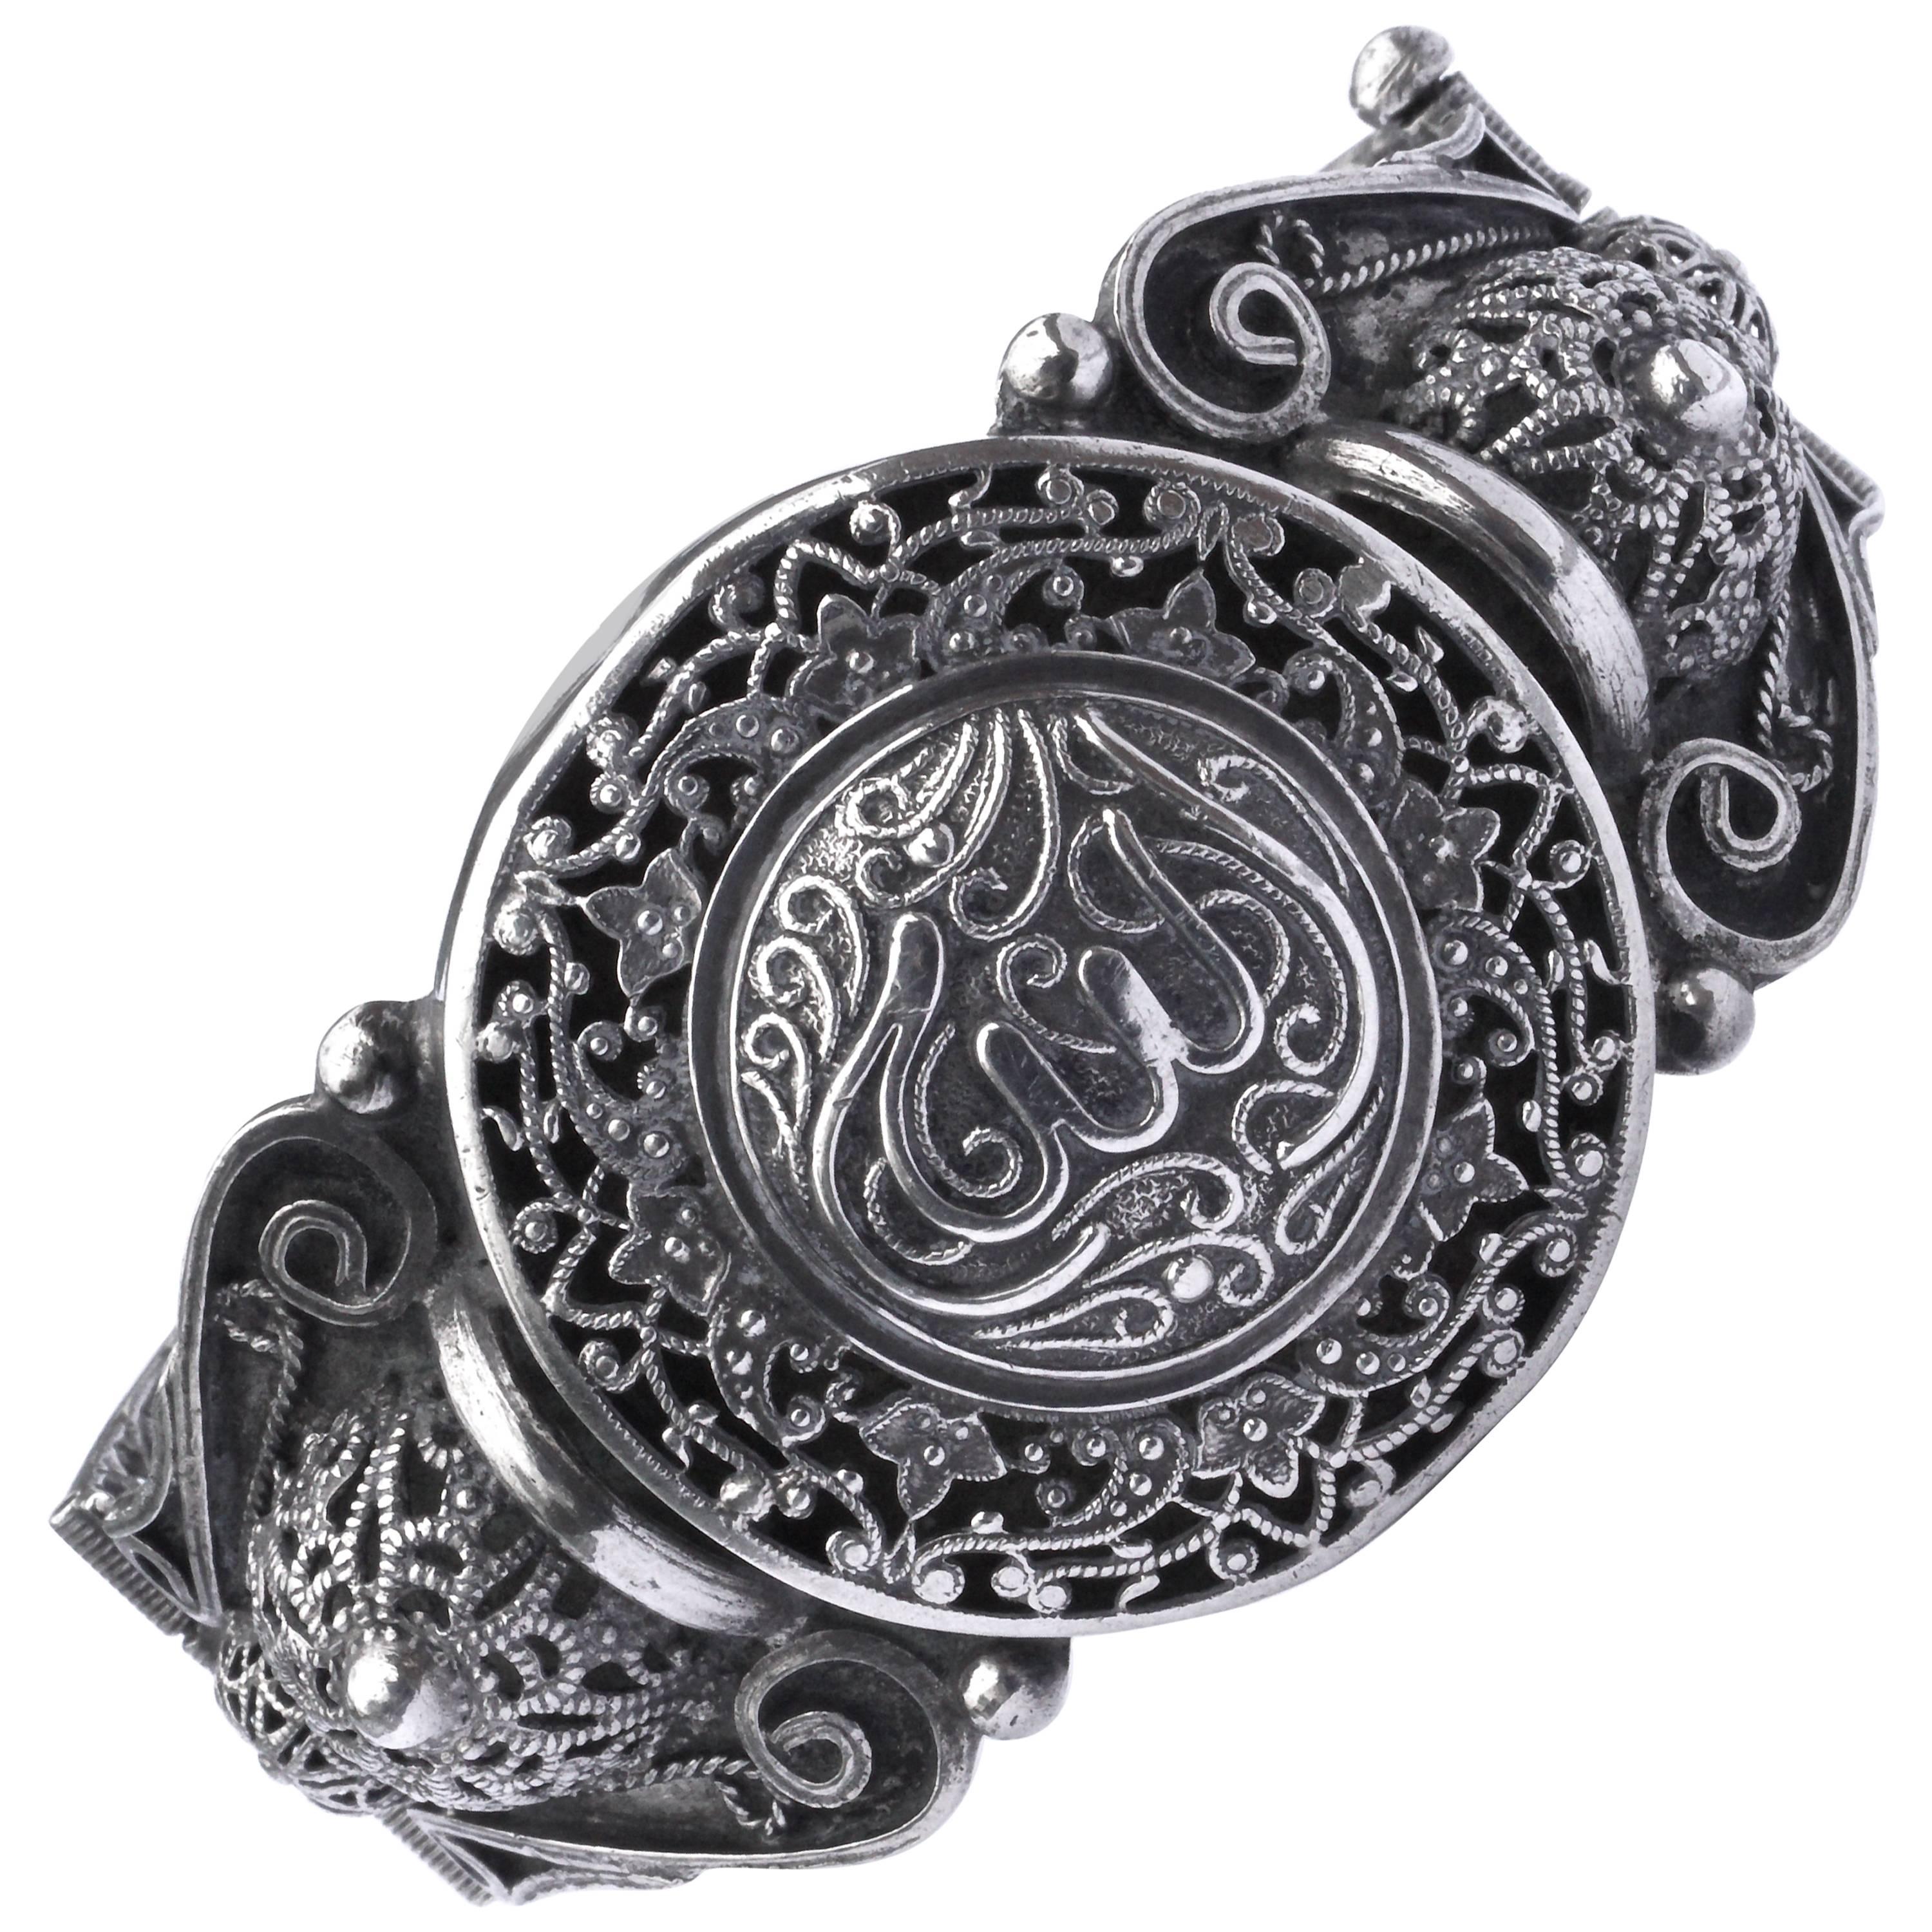 Arabic Hand Crafted Ornate Filigree Silver Bracelet circa 1930s For Sale